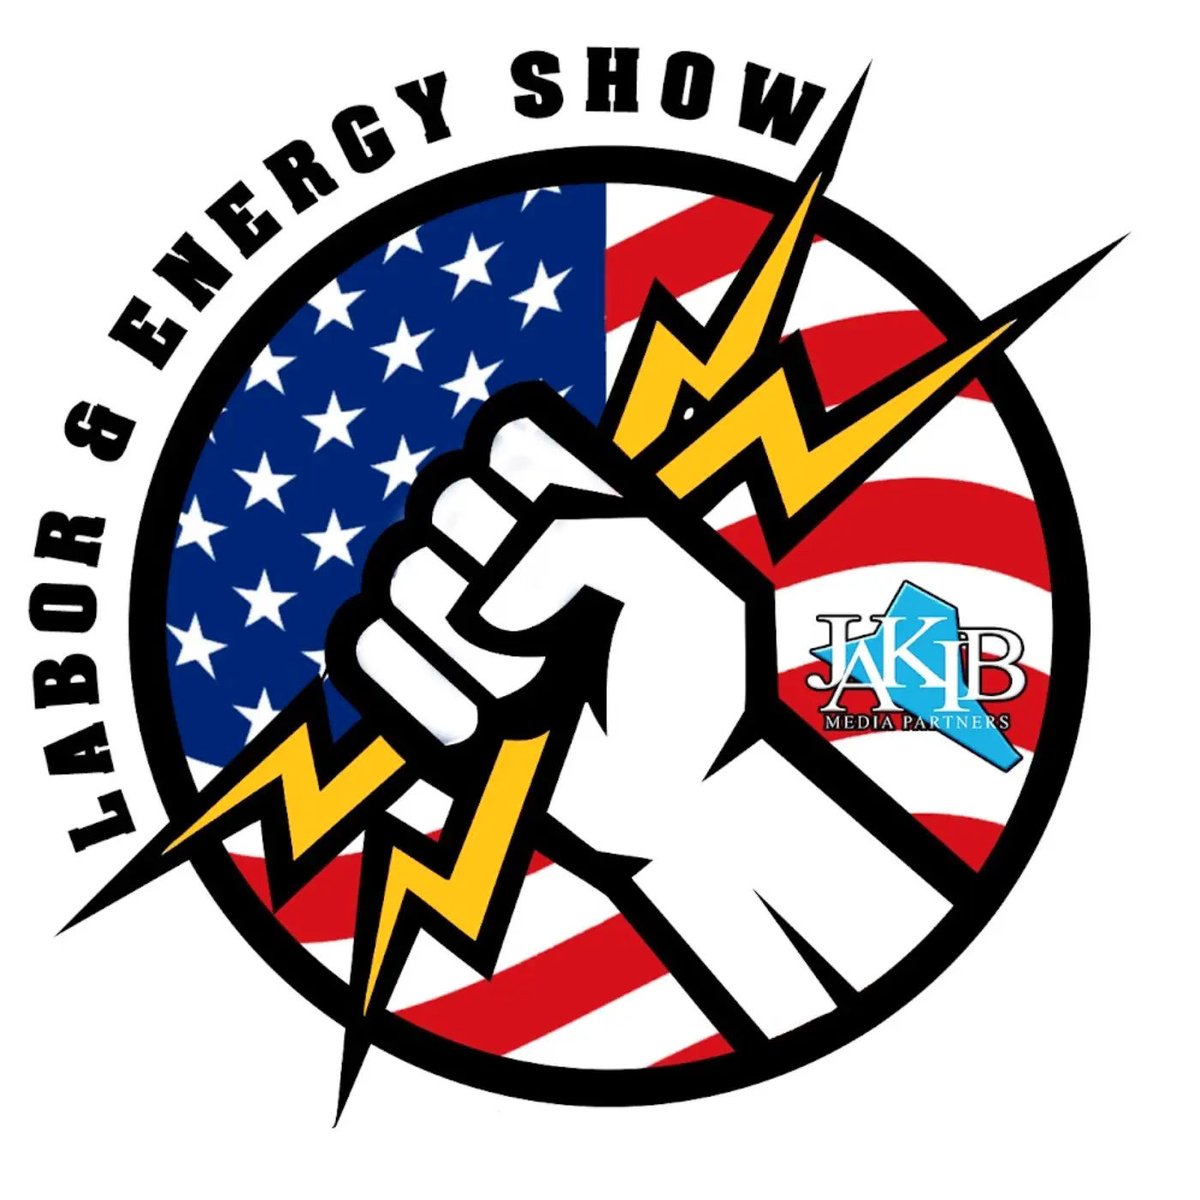 The Labor and Energy Show goes live on @1400WOND in South New Jersey at 3:00 PM Eastern! Listen live at us7.maindigitalstream.com/2917/ Looking for more podcasts & radio shows that talk about working people's issues? Visit laborradionetwork.org #1u #UnionStrong #LaborRadioPod